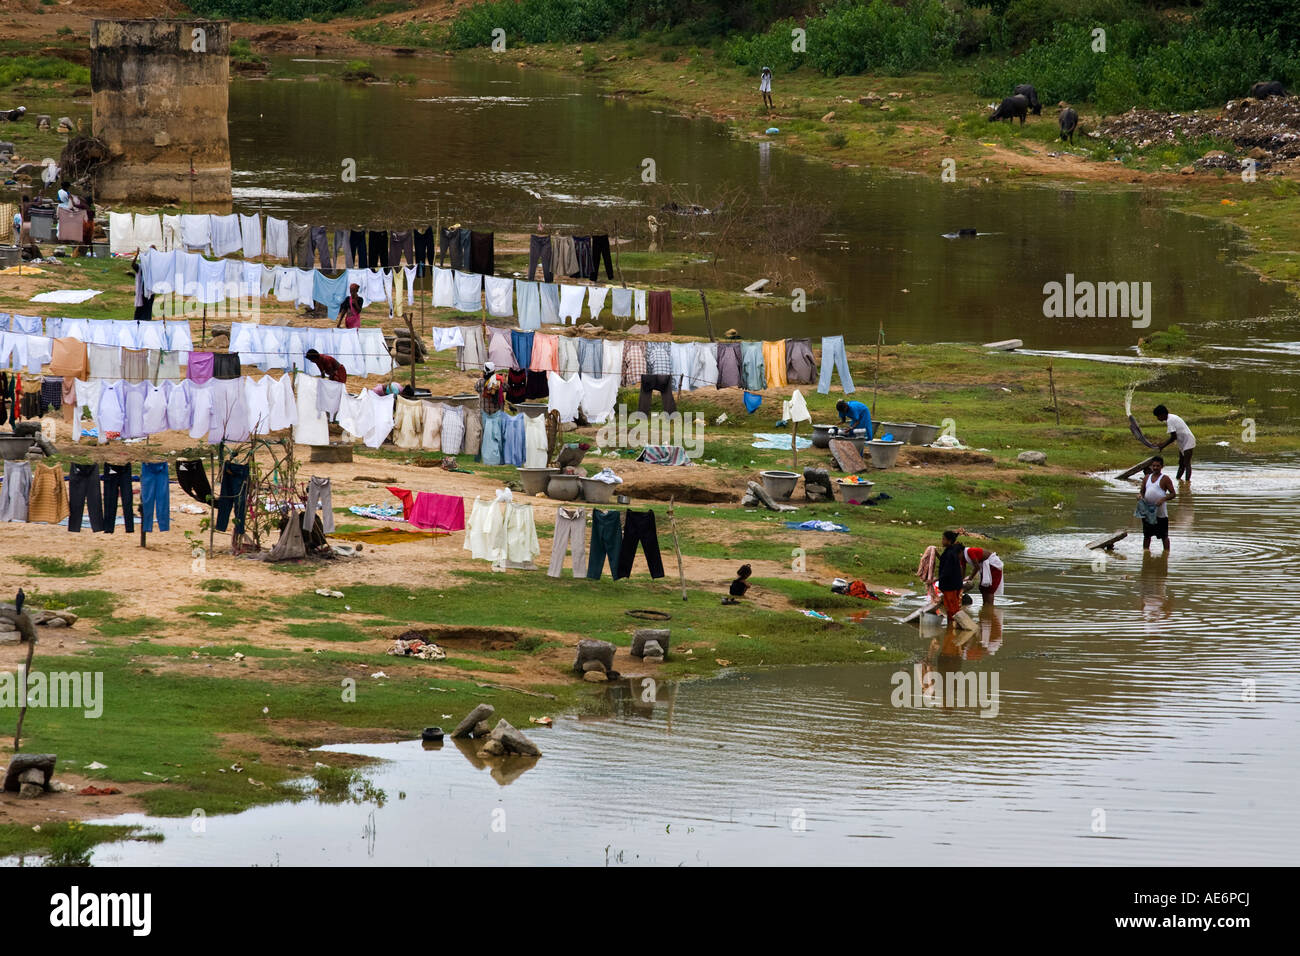 Clothes washed in Indian river and hanging out to dry Stock Photo